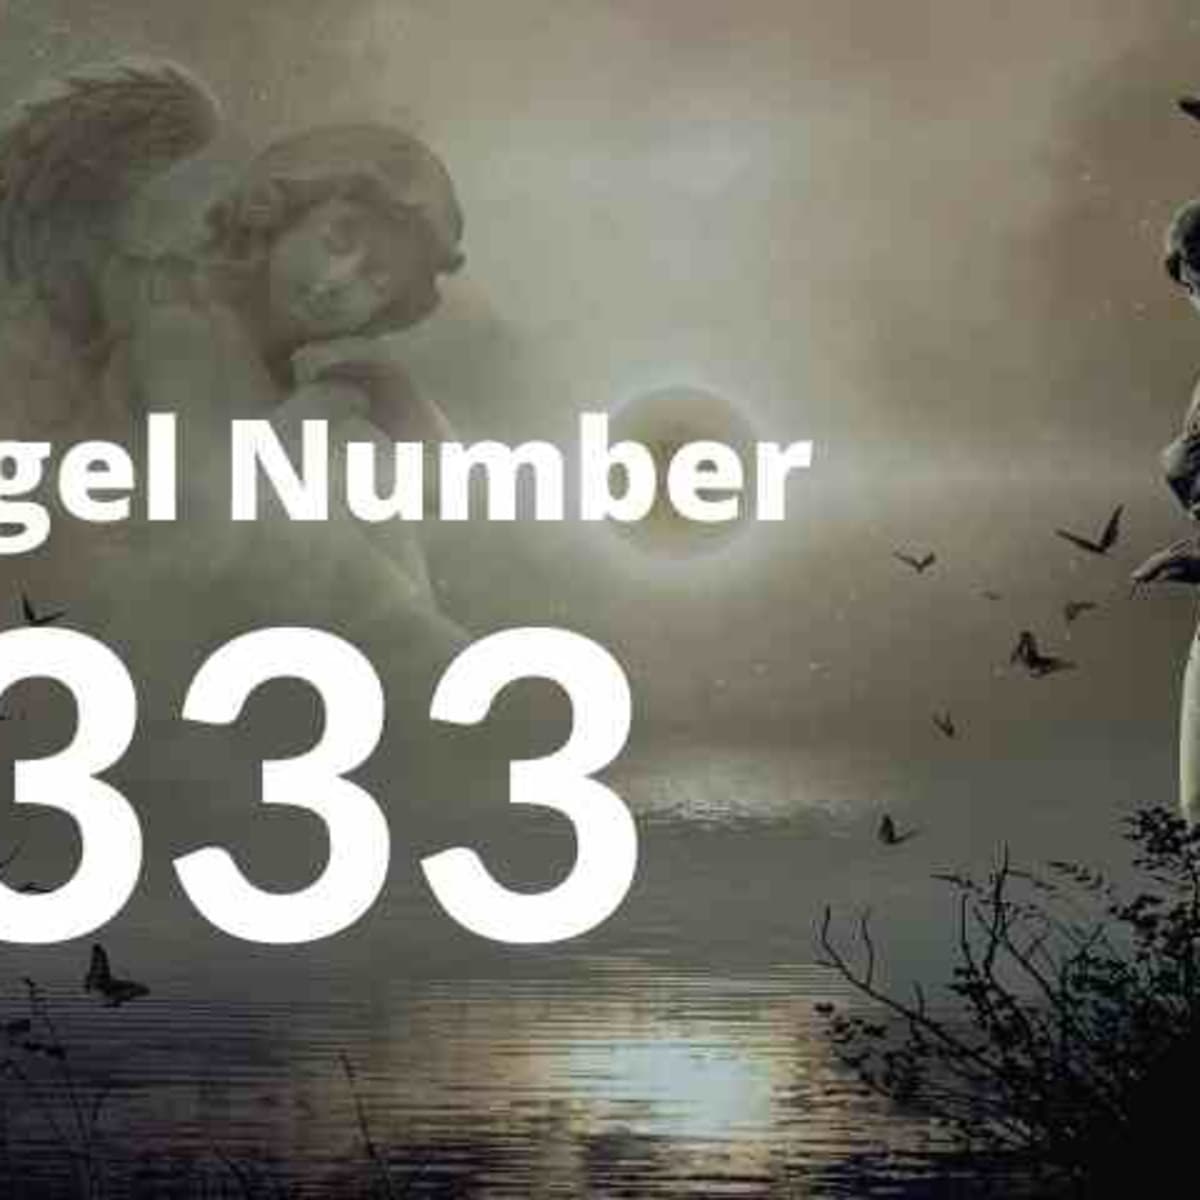 The Meaning Of Angel Number 33 And Its Symbolism